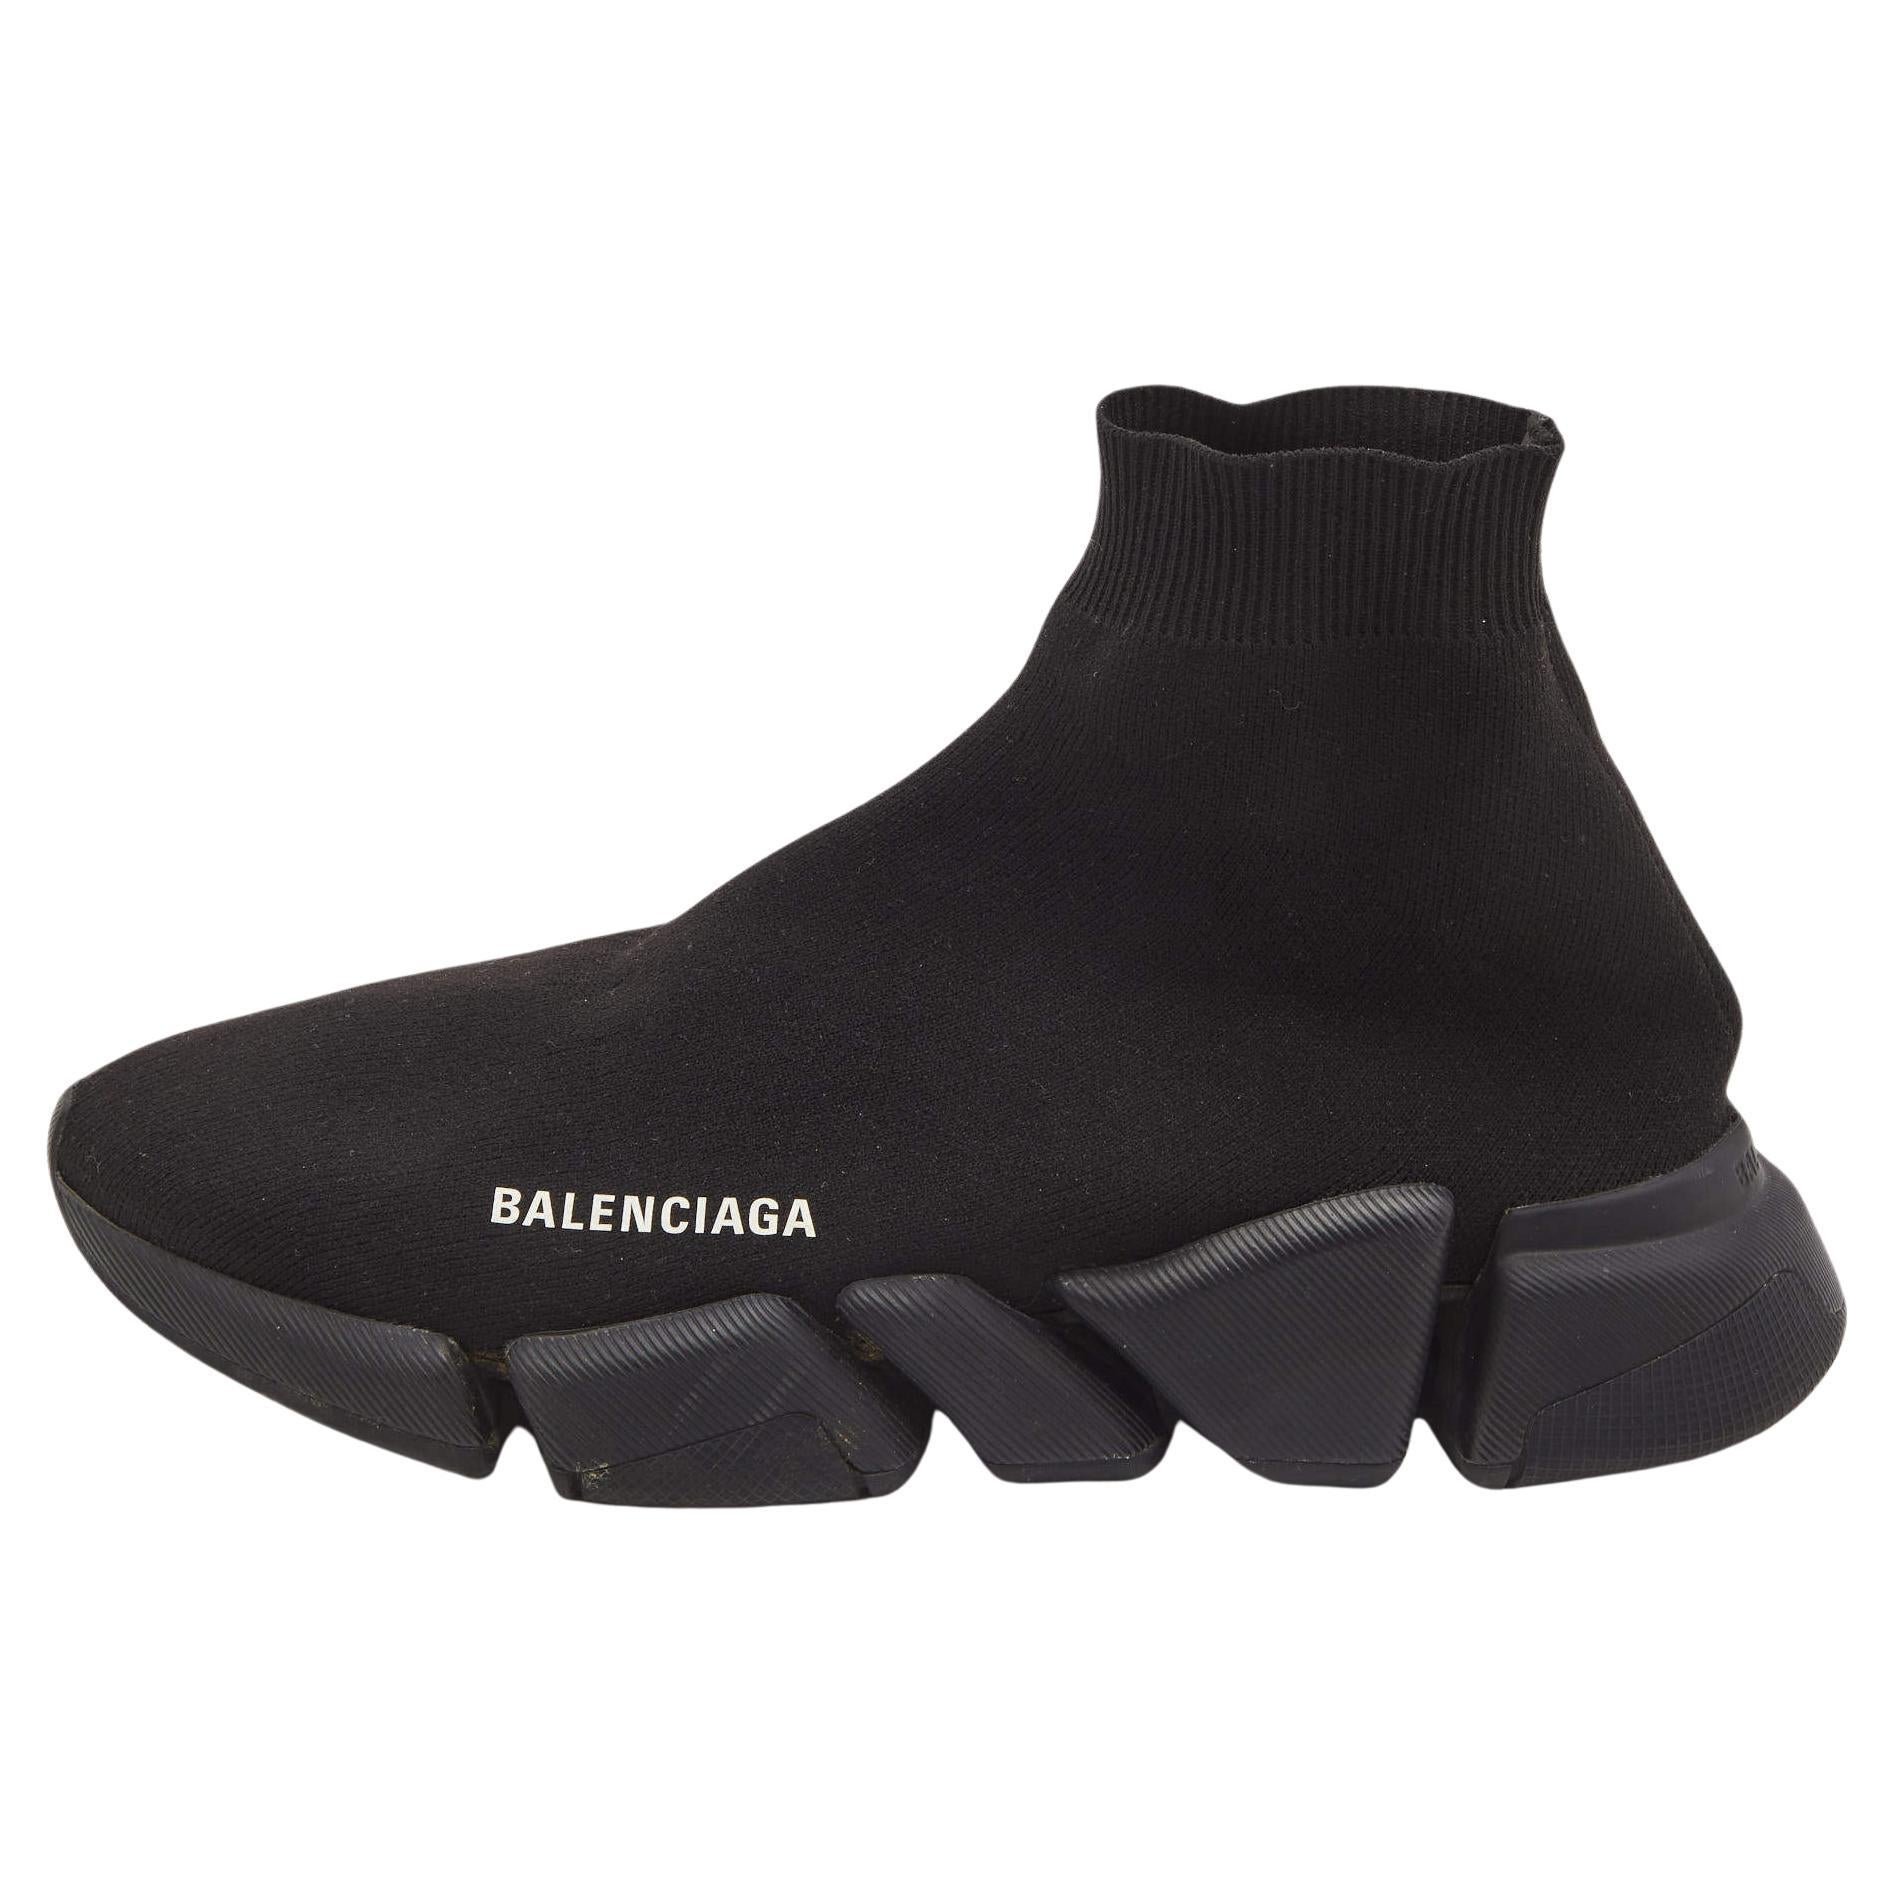 Balenciaga Black Knit Fabric Speed High Top Sneakers Size 40